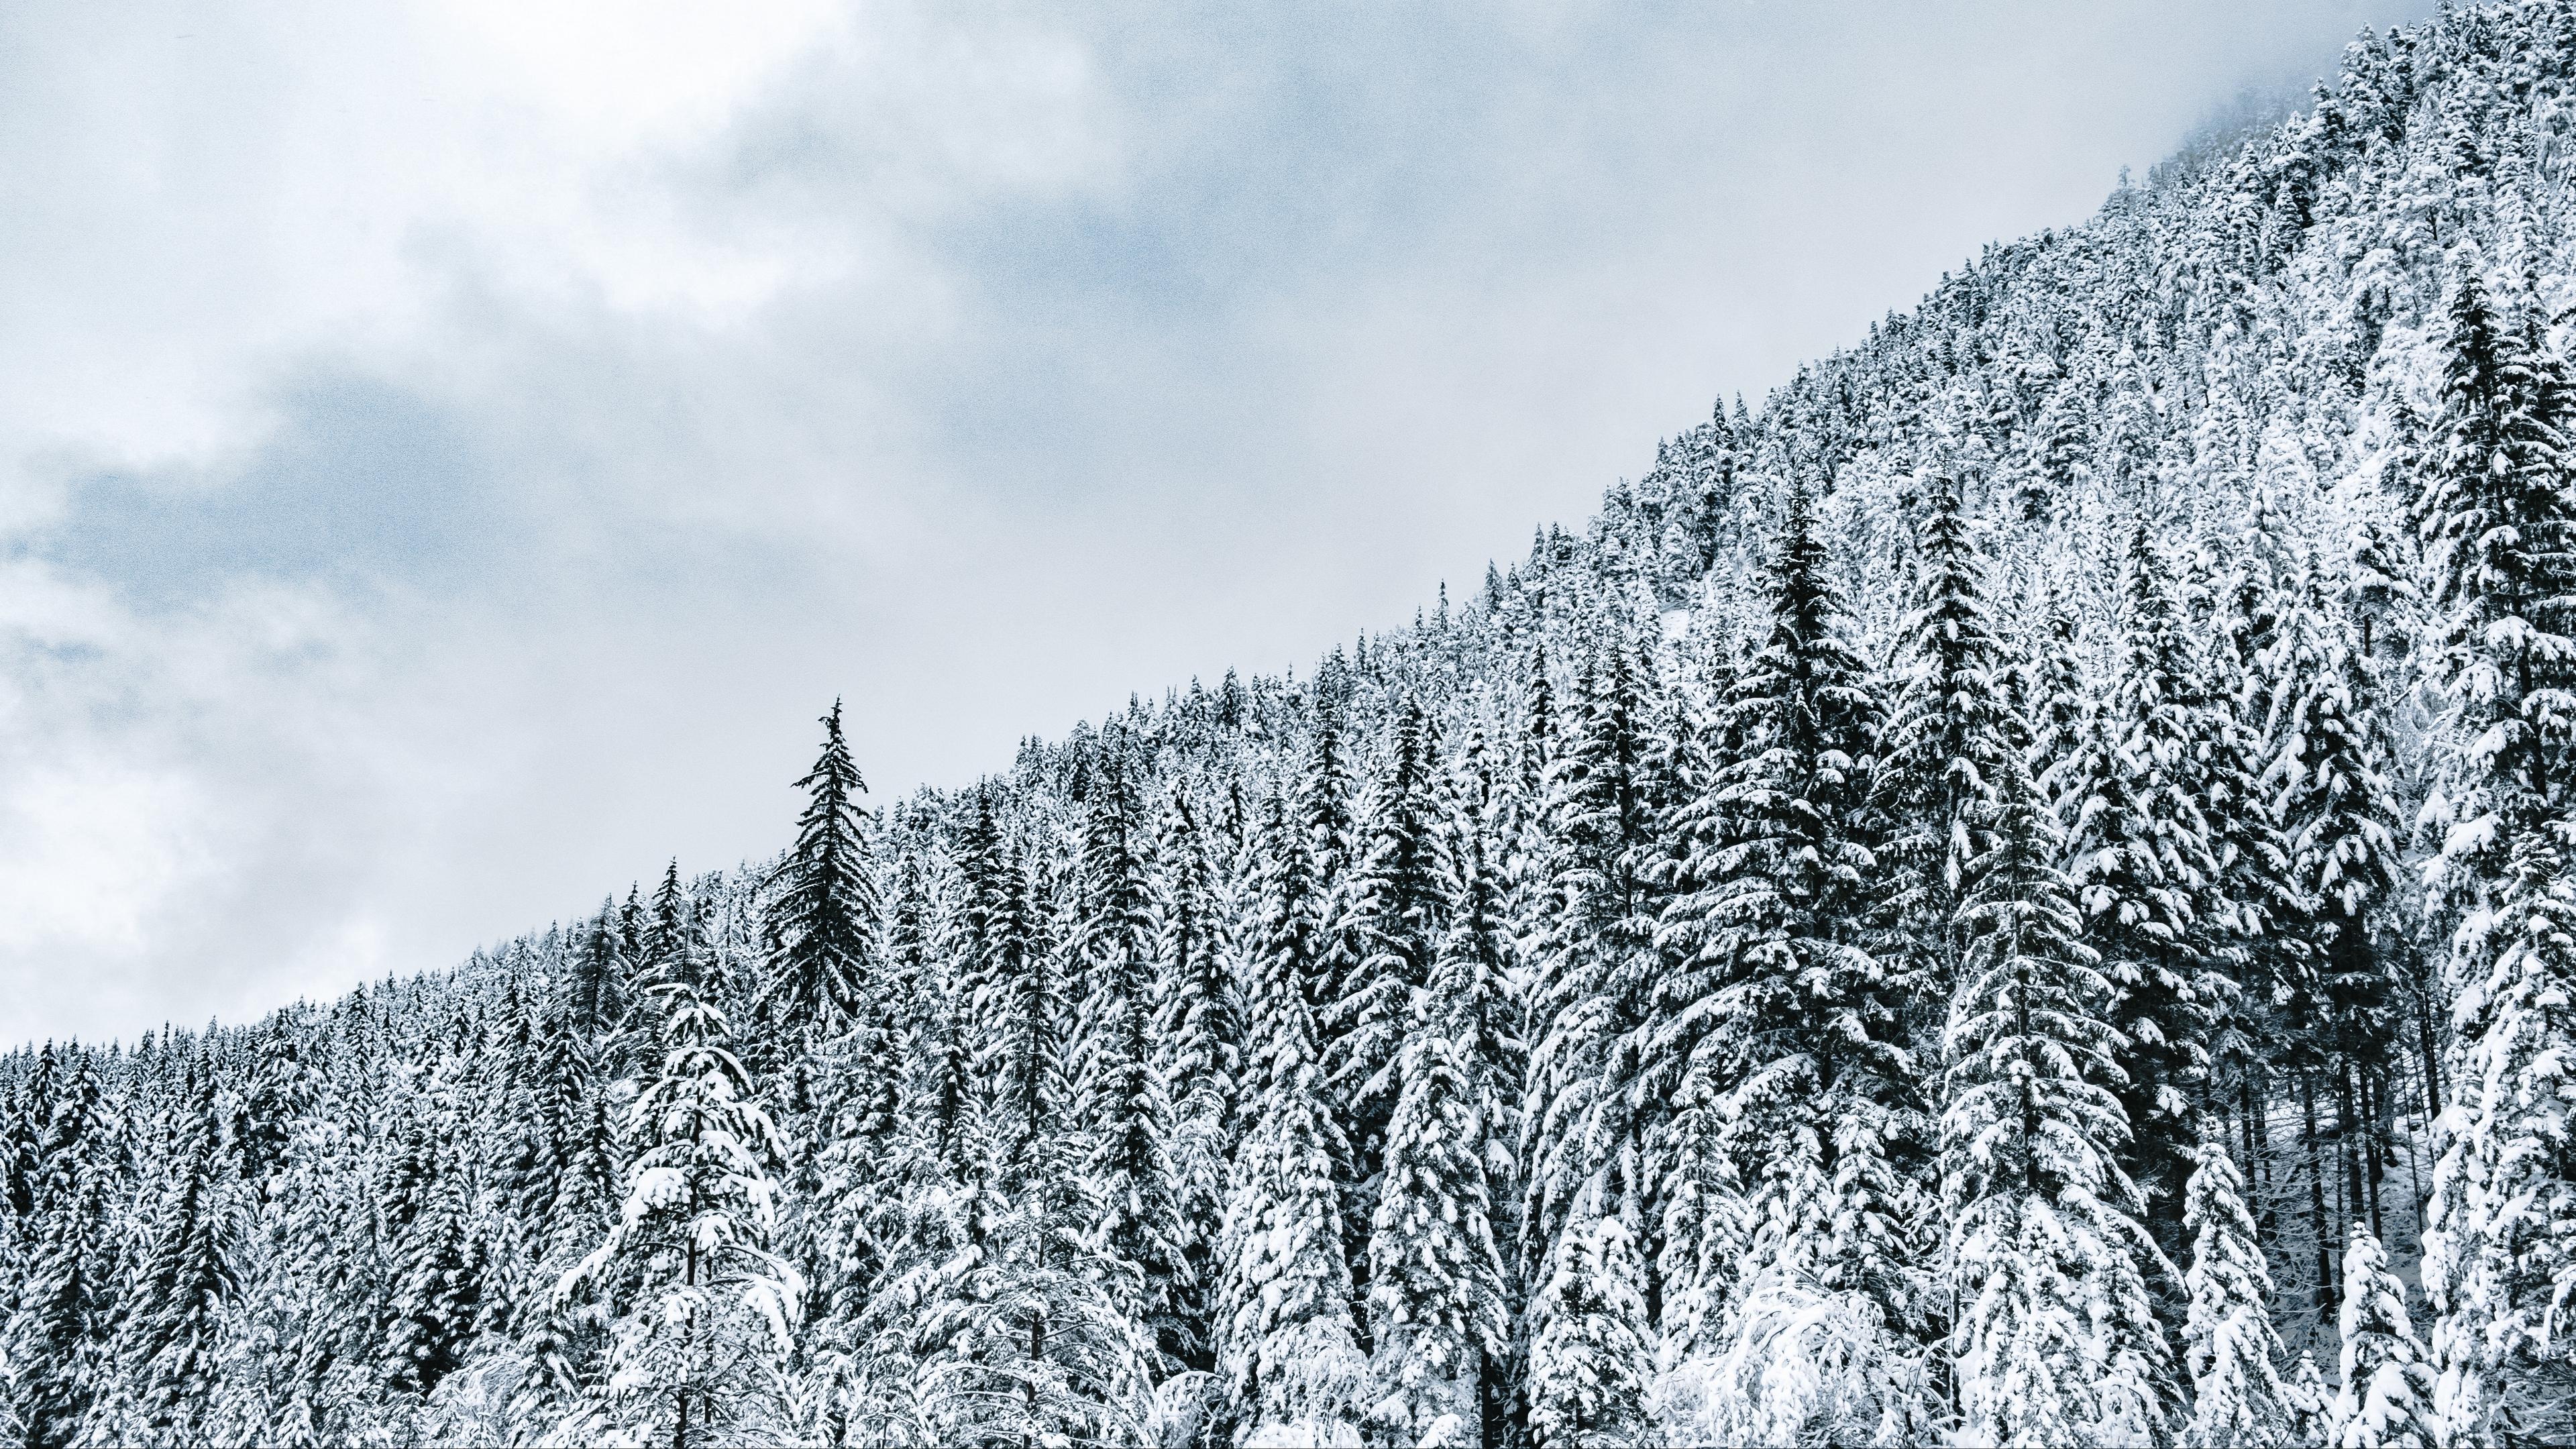 Download wallpaper 3840x2160 forest, trees, snow, snowy